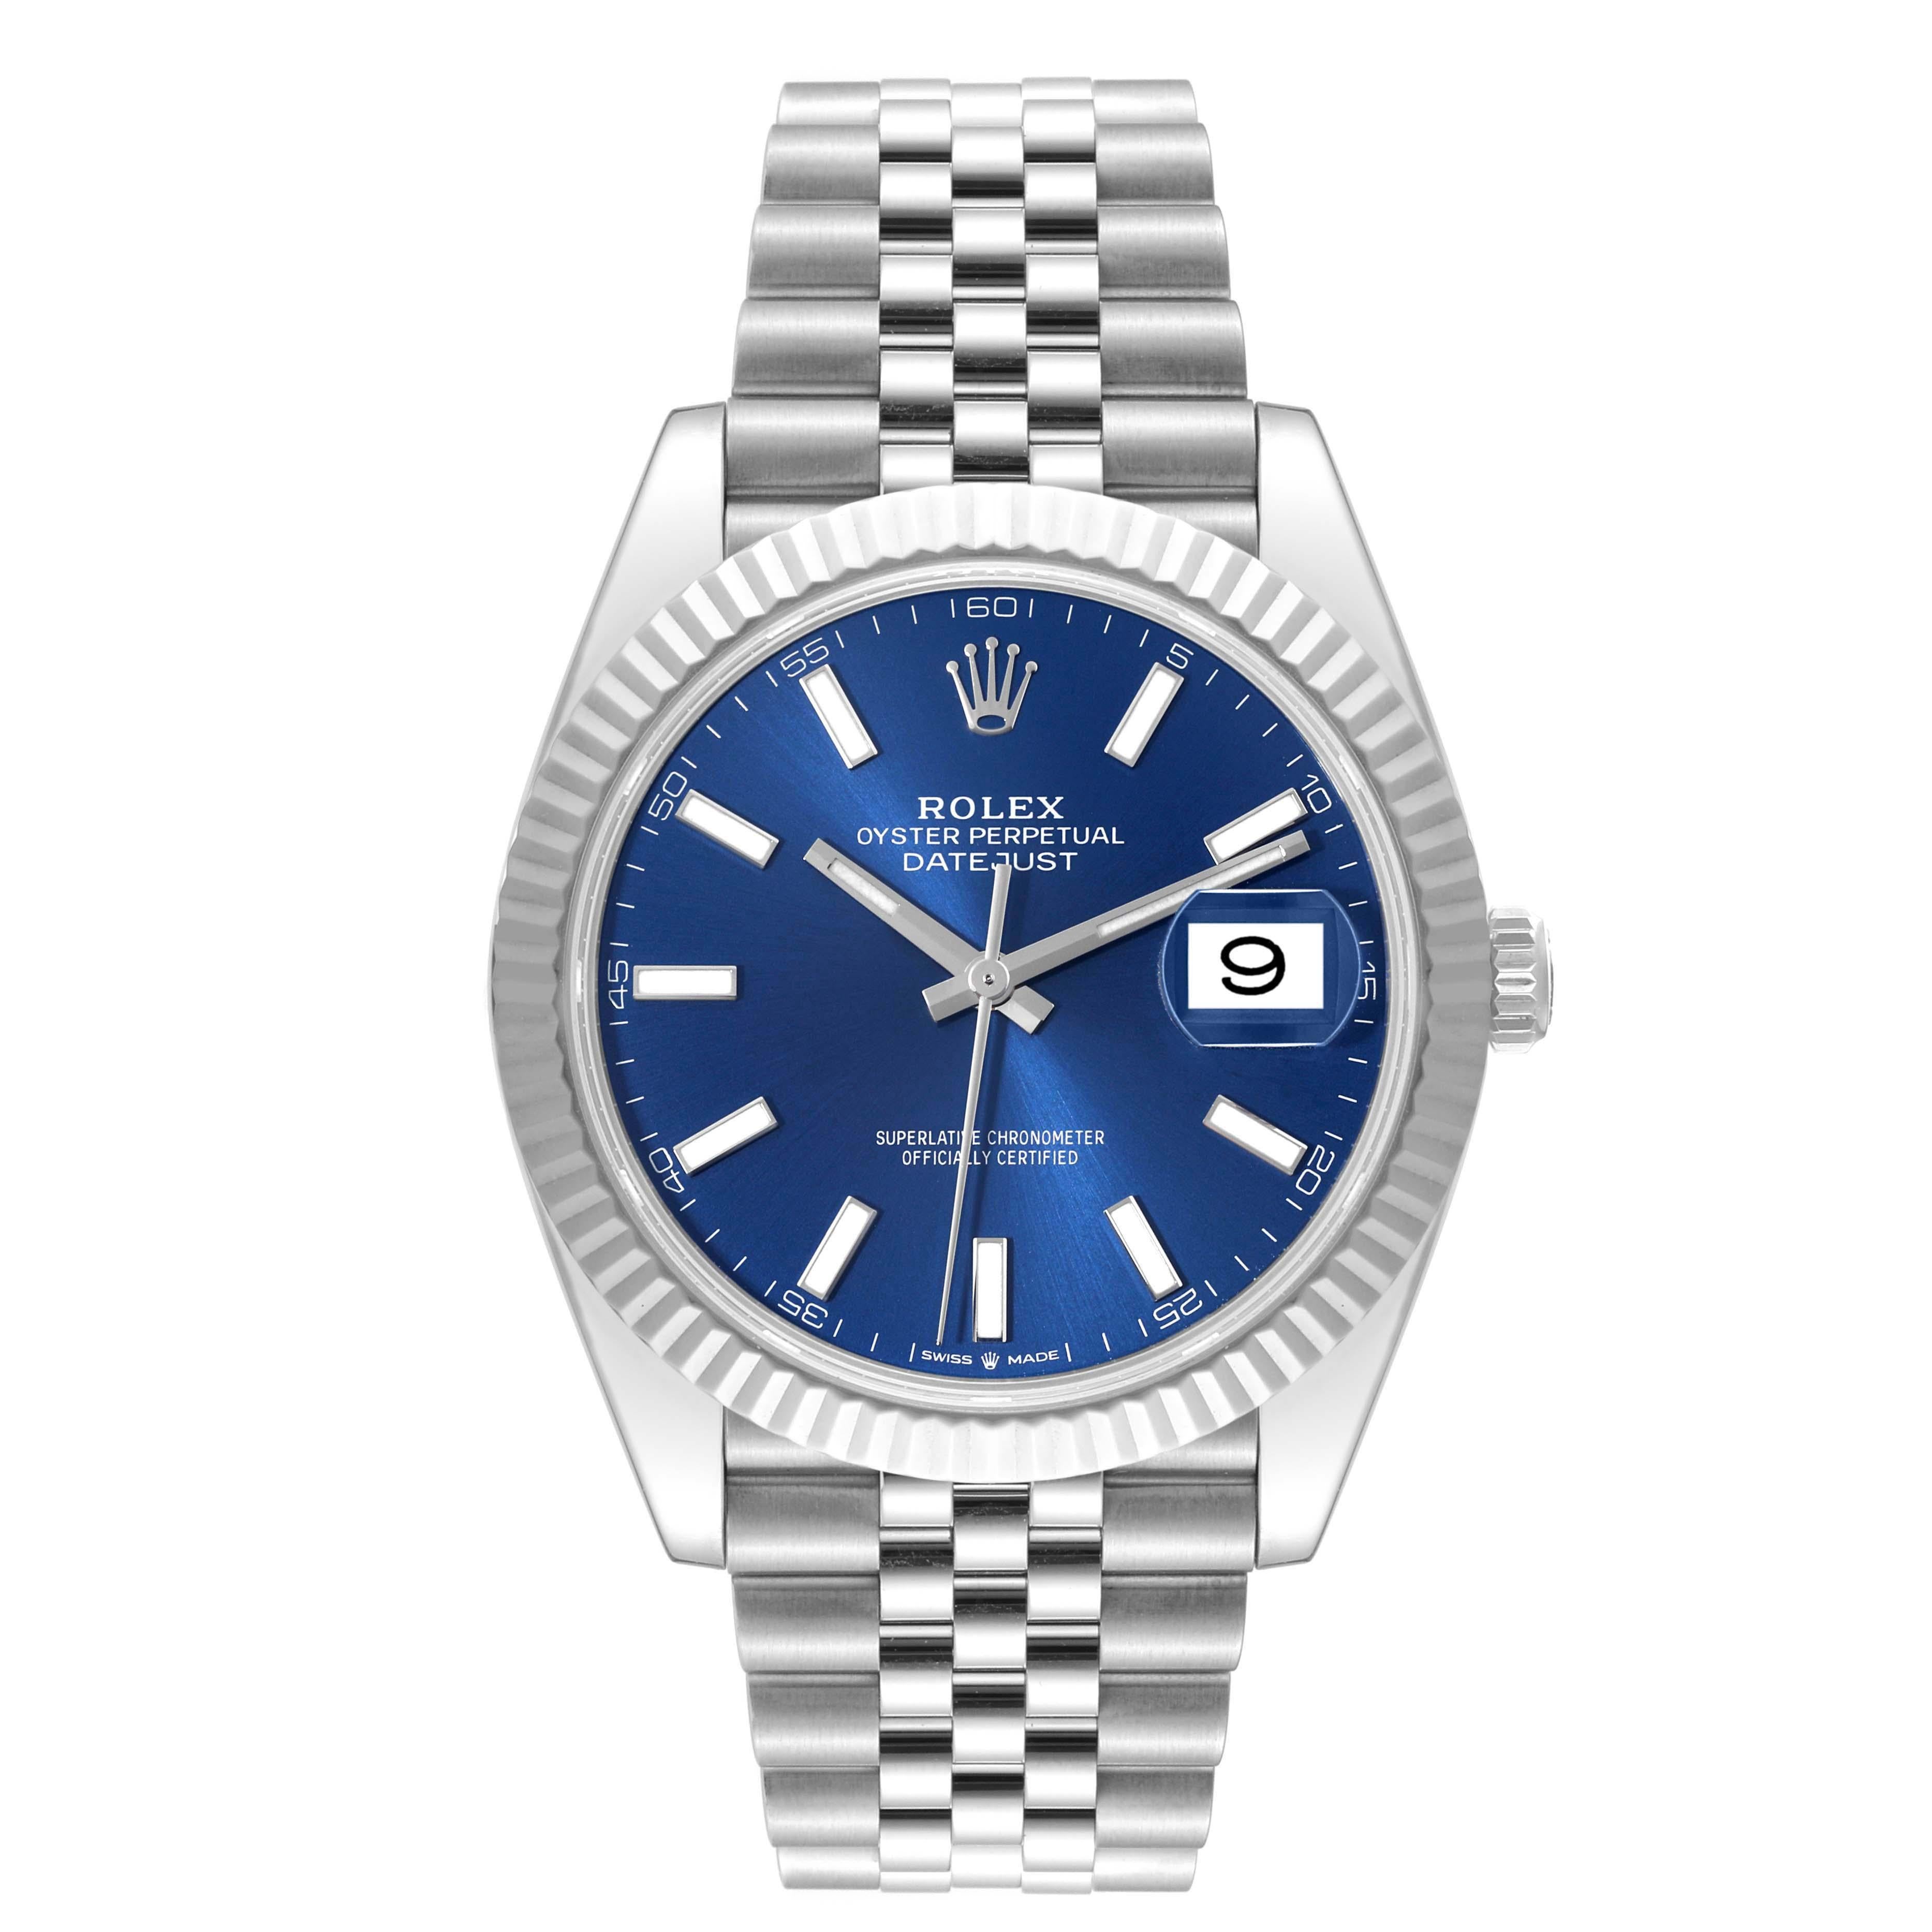 Rolex Datejust 41 Steel White Gold Blue Dial Mens Watch 126334 Box Card 1